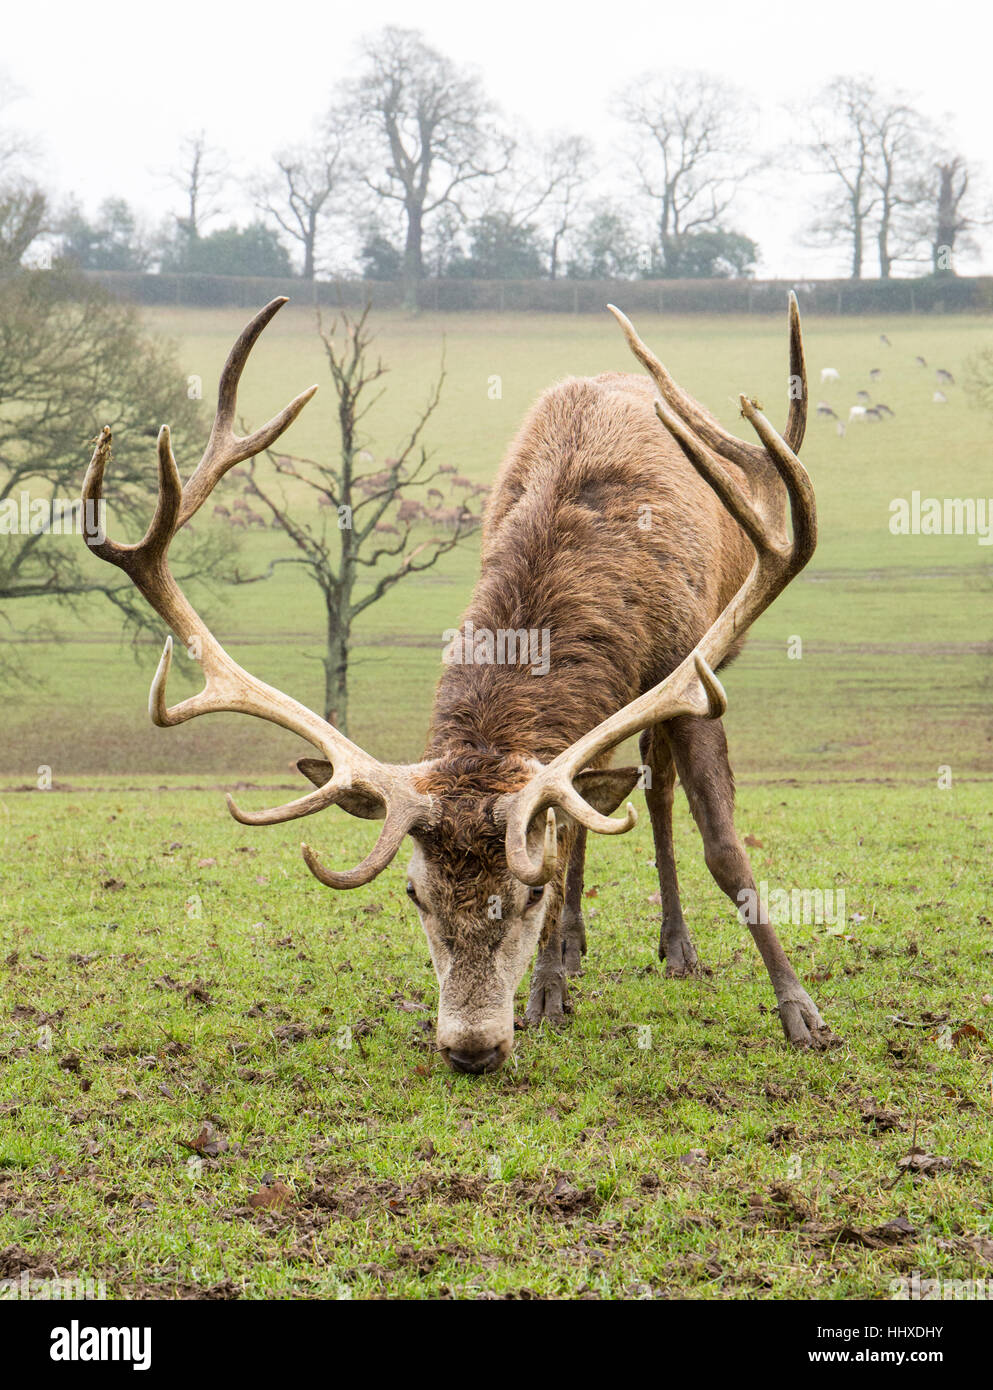 red deer stag bent down eating grass in a field Stock Photo